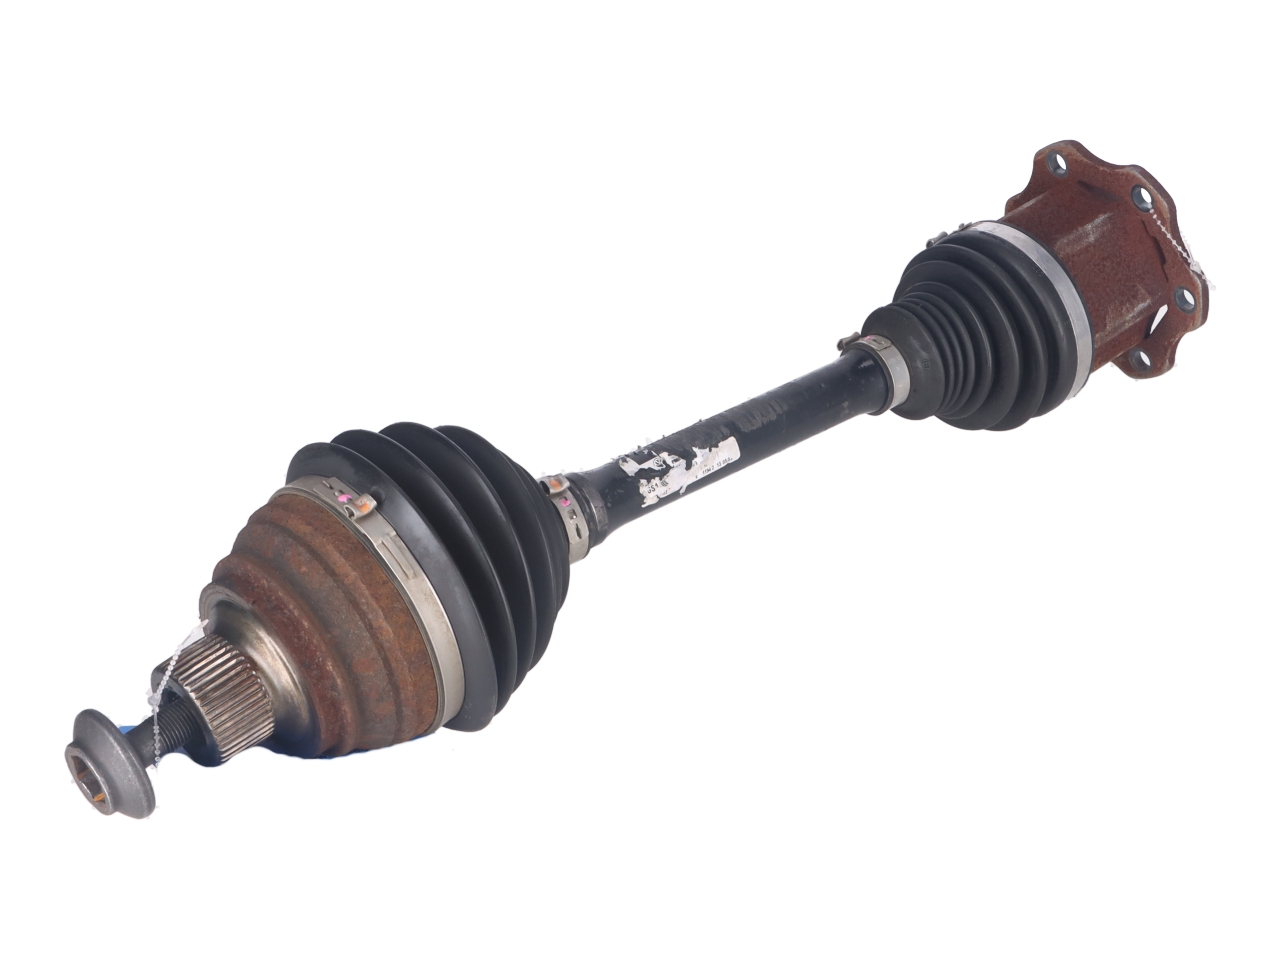 AUDI A6 C7/4G (2010-2020) Front Right Driveshaft 4G0407271E 23454322